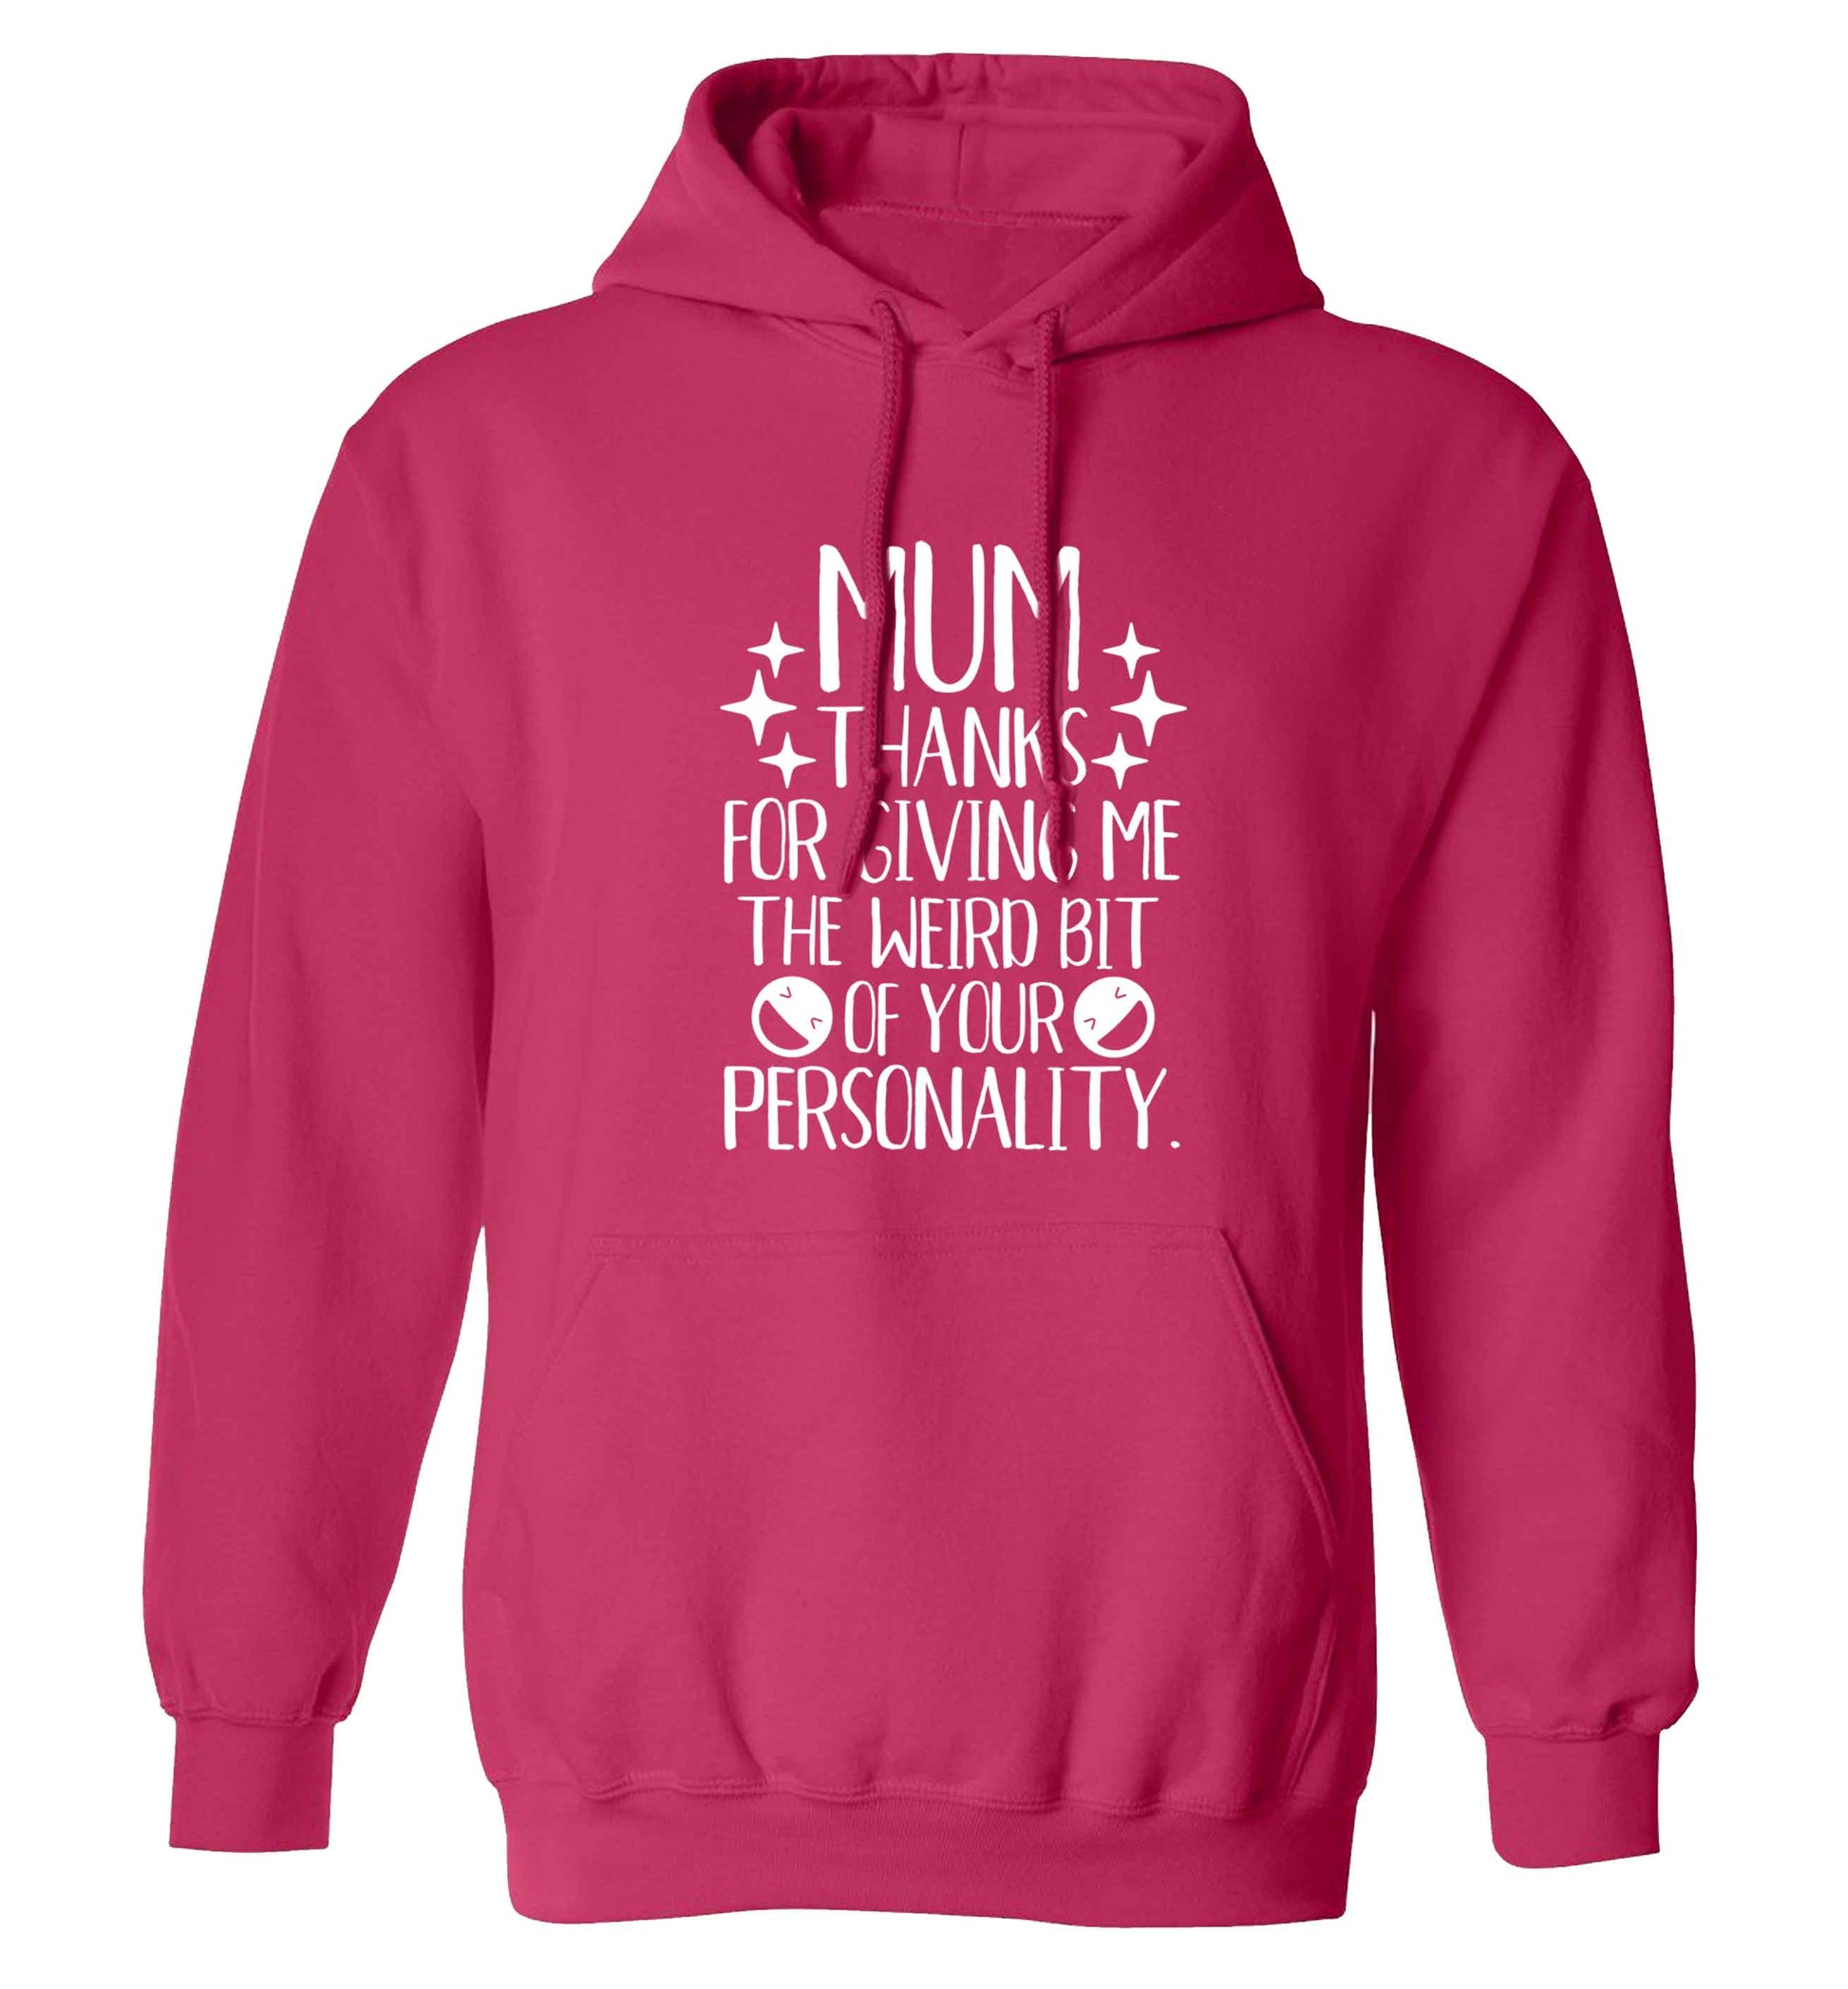 Mum, I love you more than halloumi and if you know me at all you know how deep that is adults unisex pink hoodie 2XL